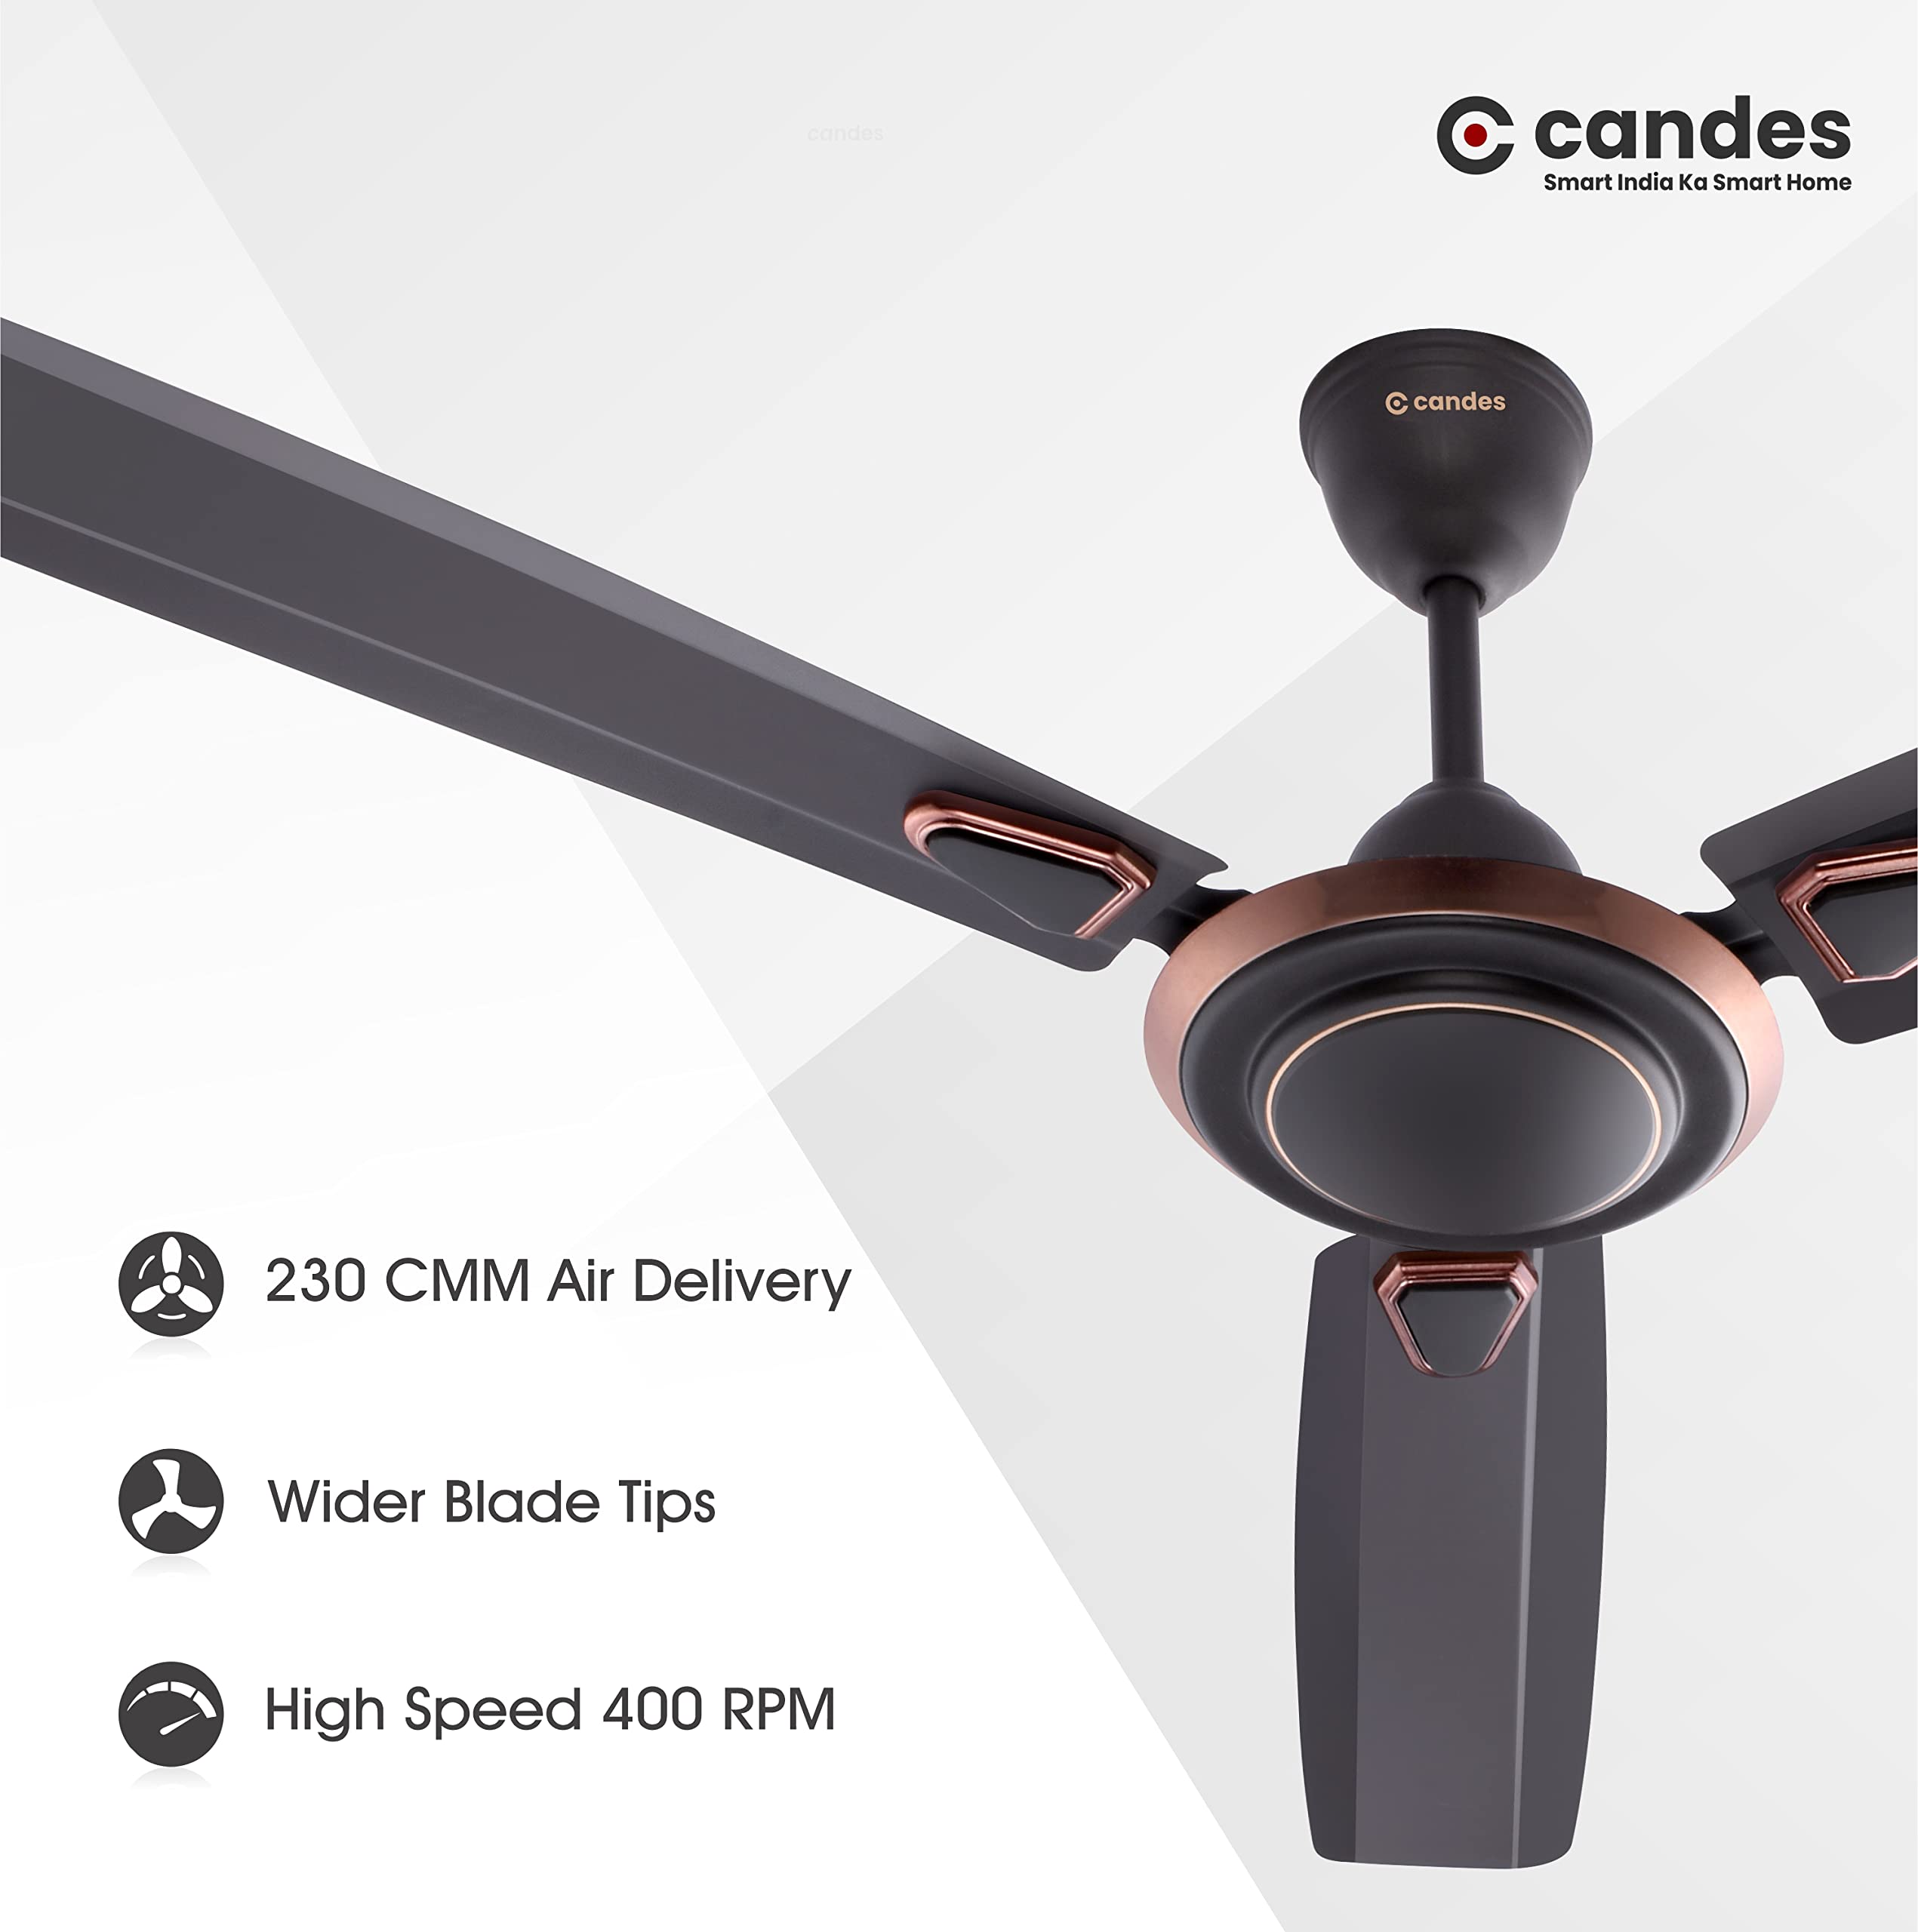 Candes Breeza 1200mm/48 inch High Speed Anti dust Decorative 5 Star Rated Ceiling Fan 400 RPM with 2 Yrs Warranty (Pack of 1,Coffee Brown) (Coffee Brown, Pack of 1)